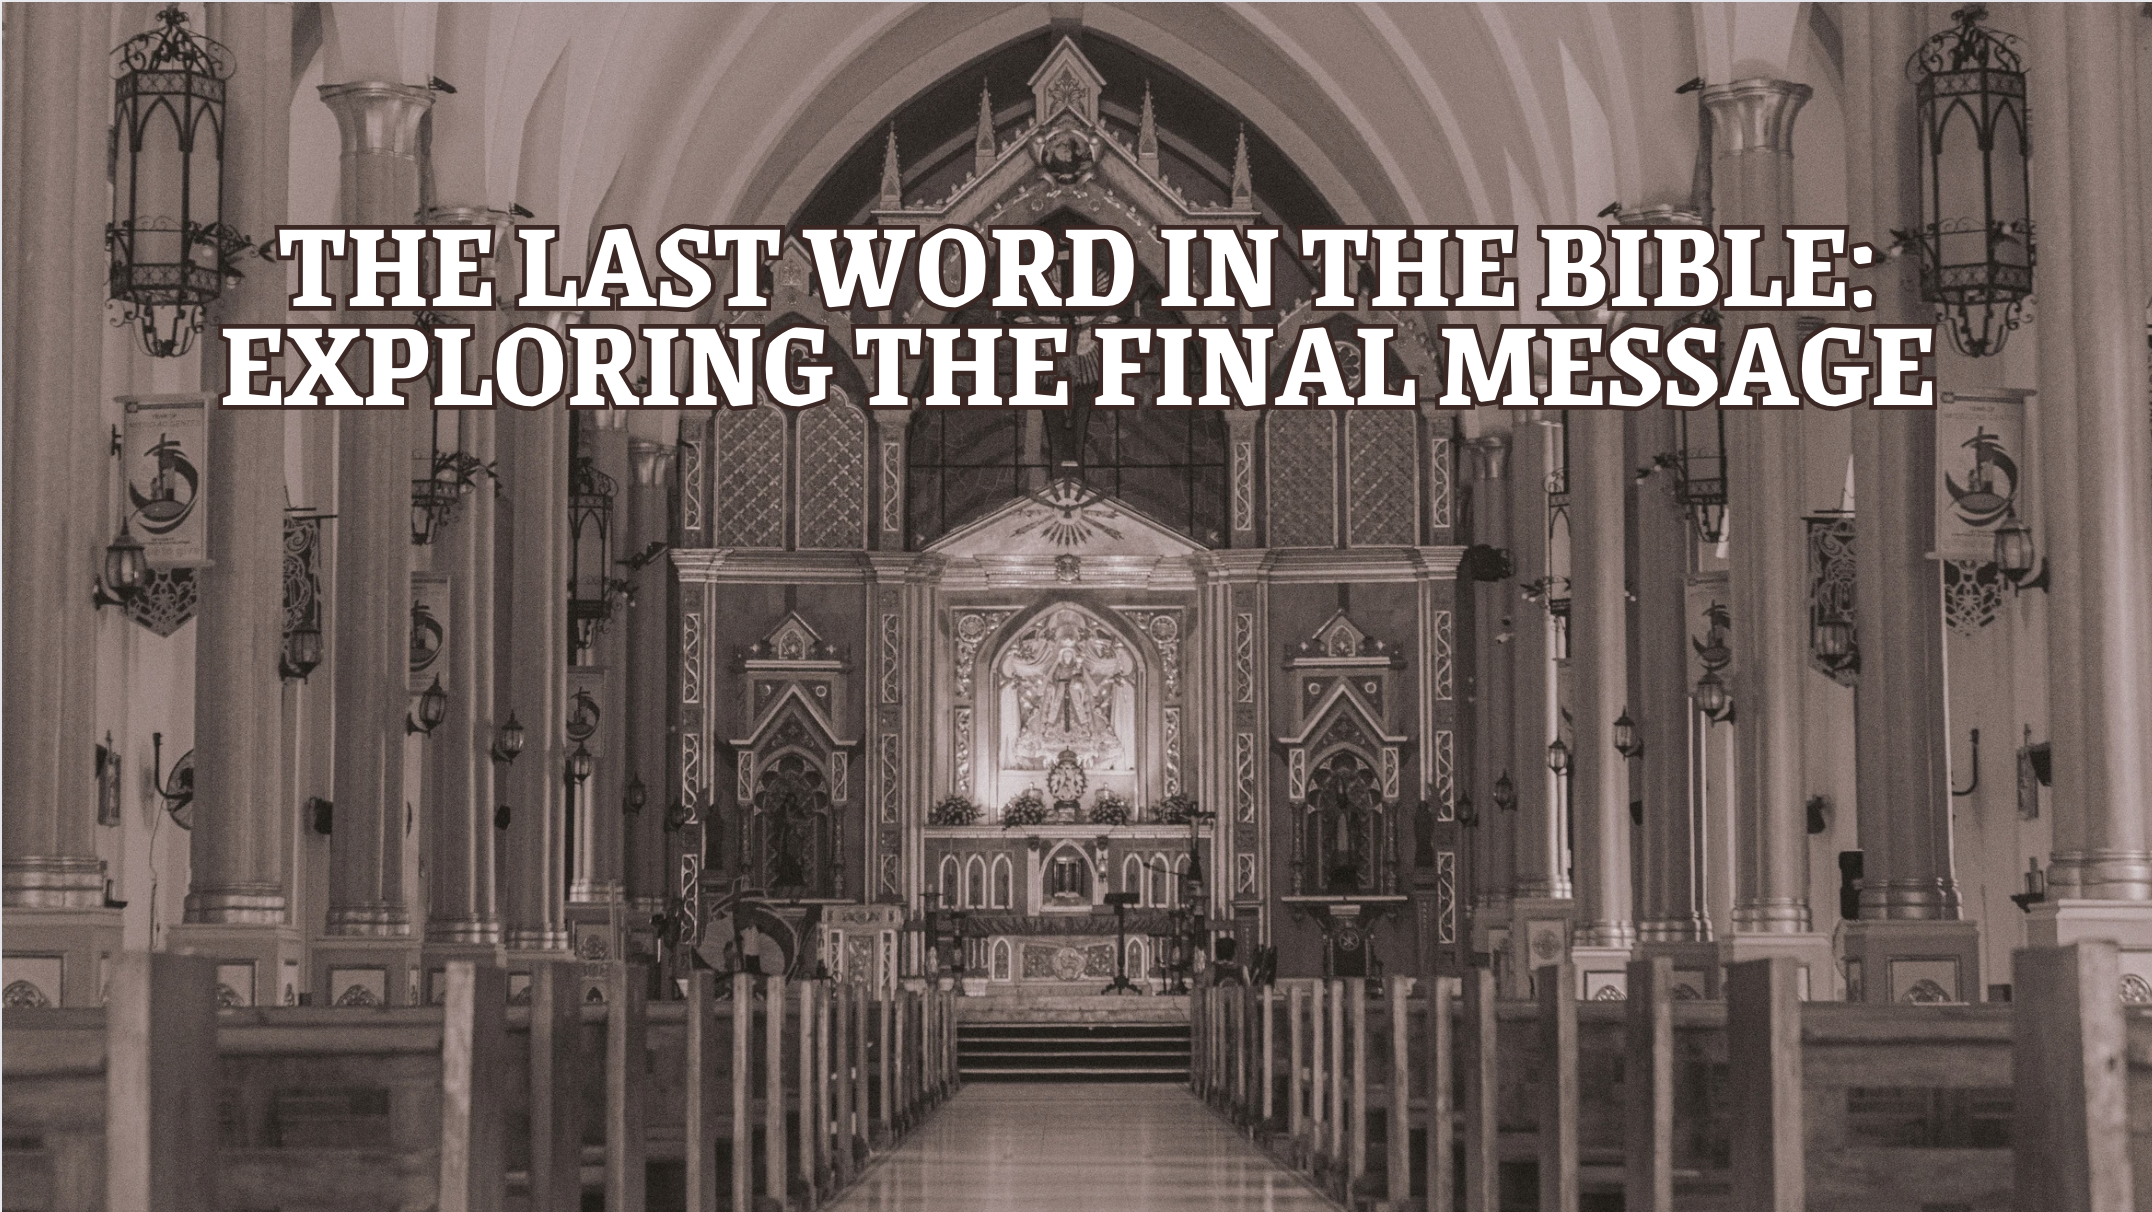 The Last Word in the Bible: Exploring the Final Message